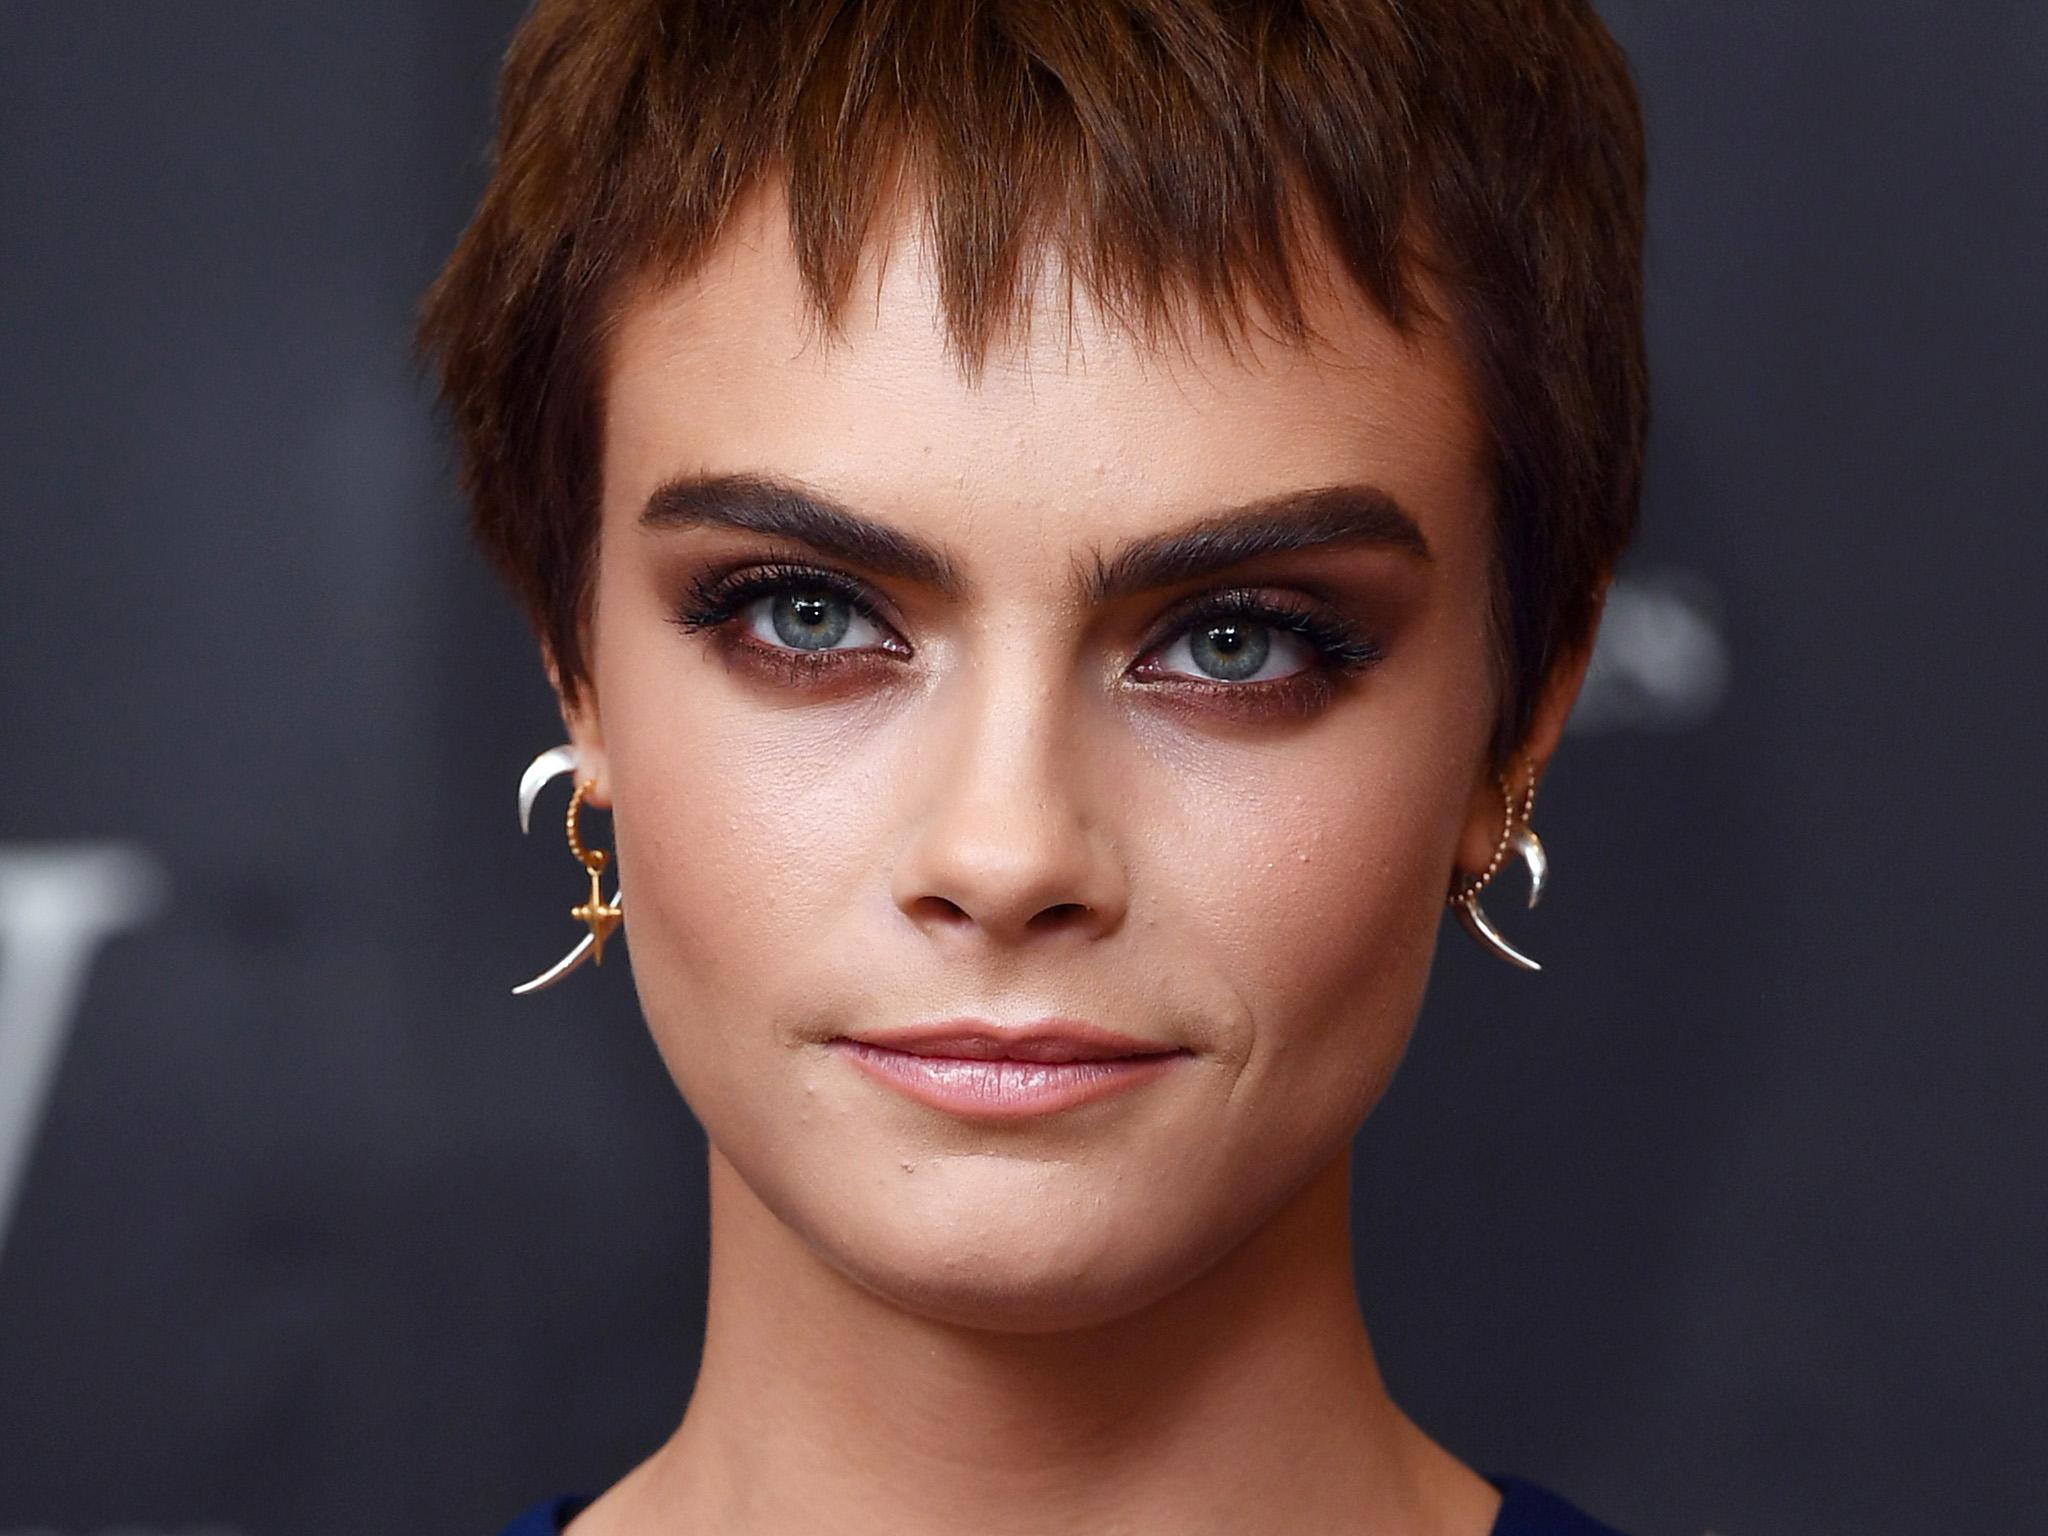 Cara Delevingne is the latest celebrity to share her experience of sexual abuse (